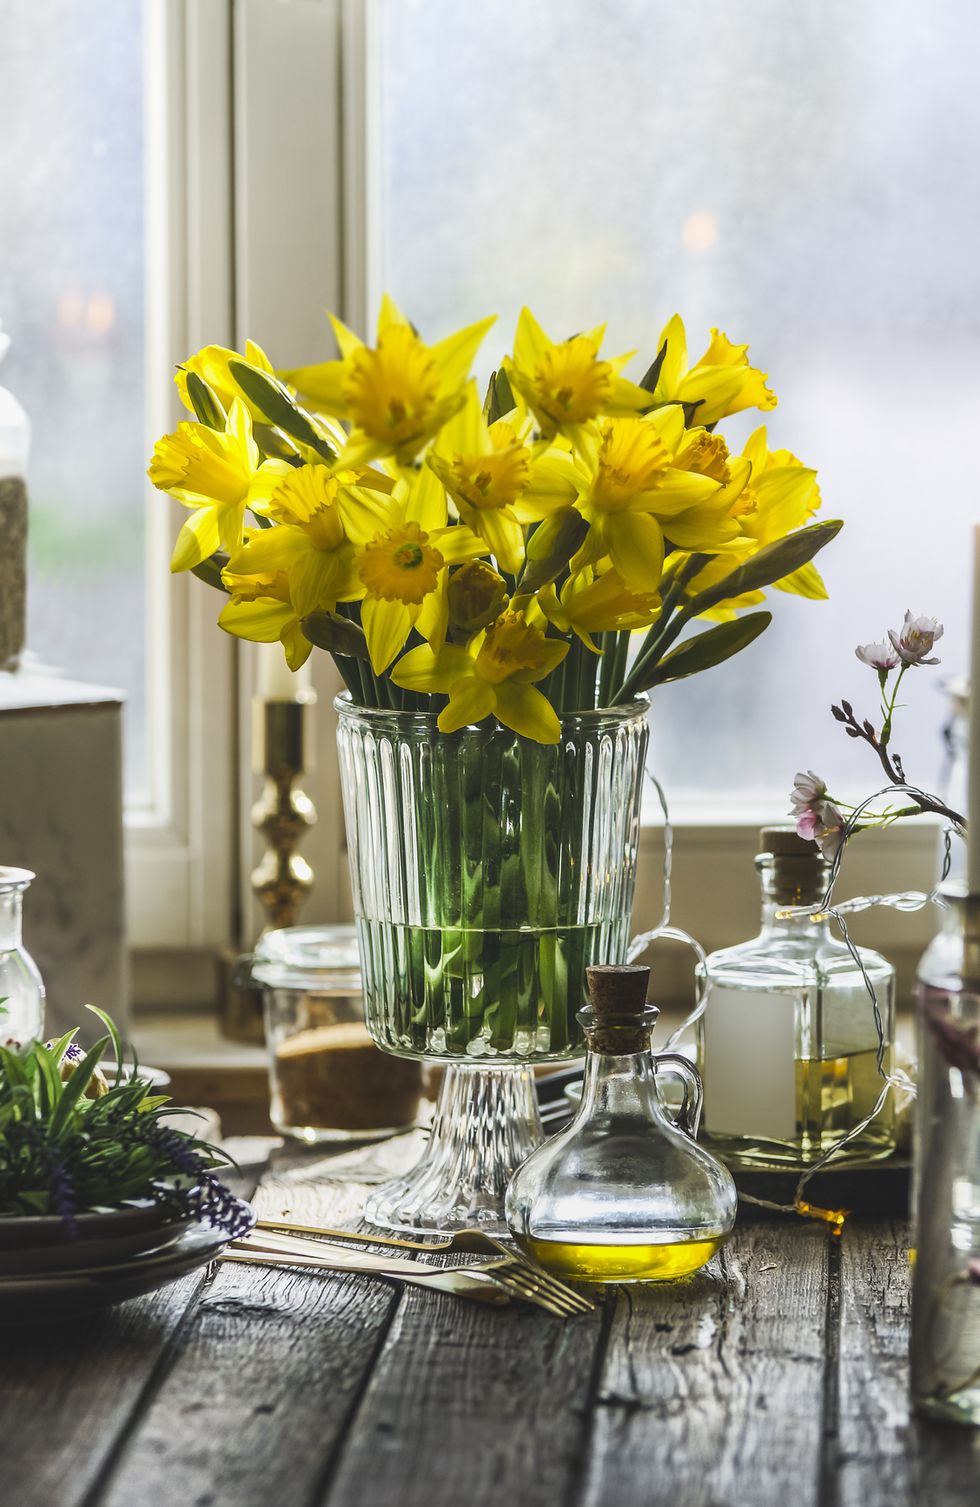 yellow daffodils flowers bunch in glass vase on kitchen table with candles , plates , jars and bottles at window background cozy springtime at home still life